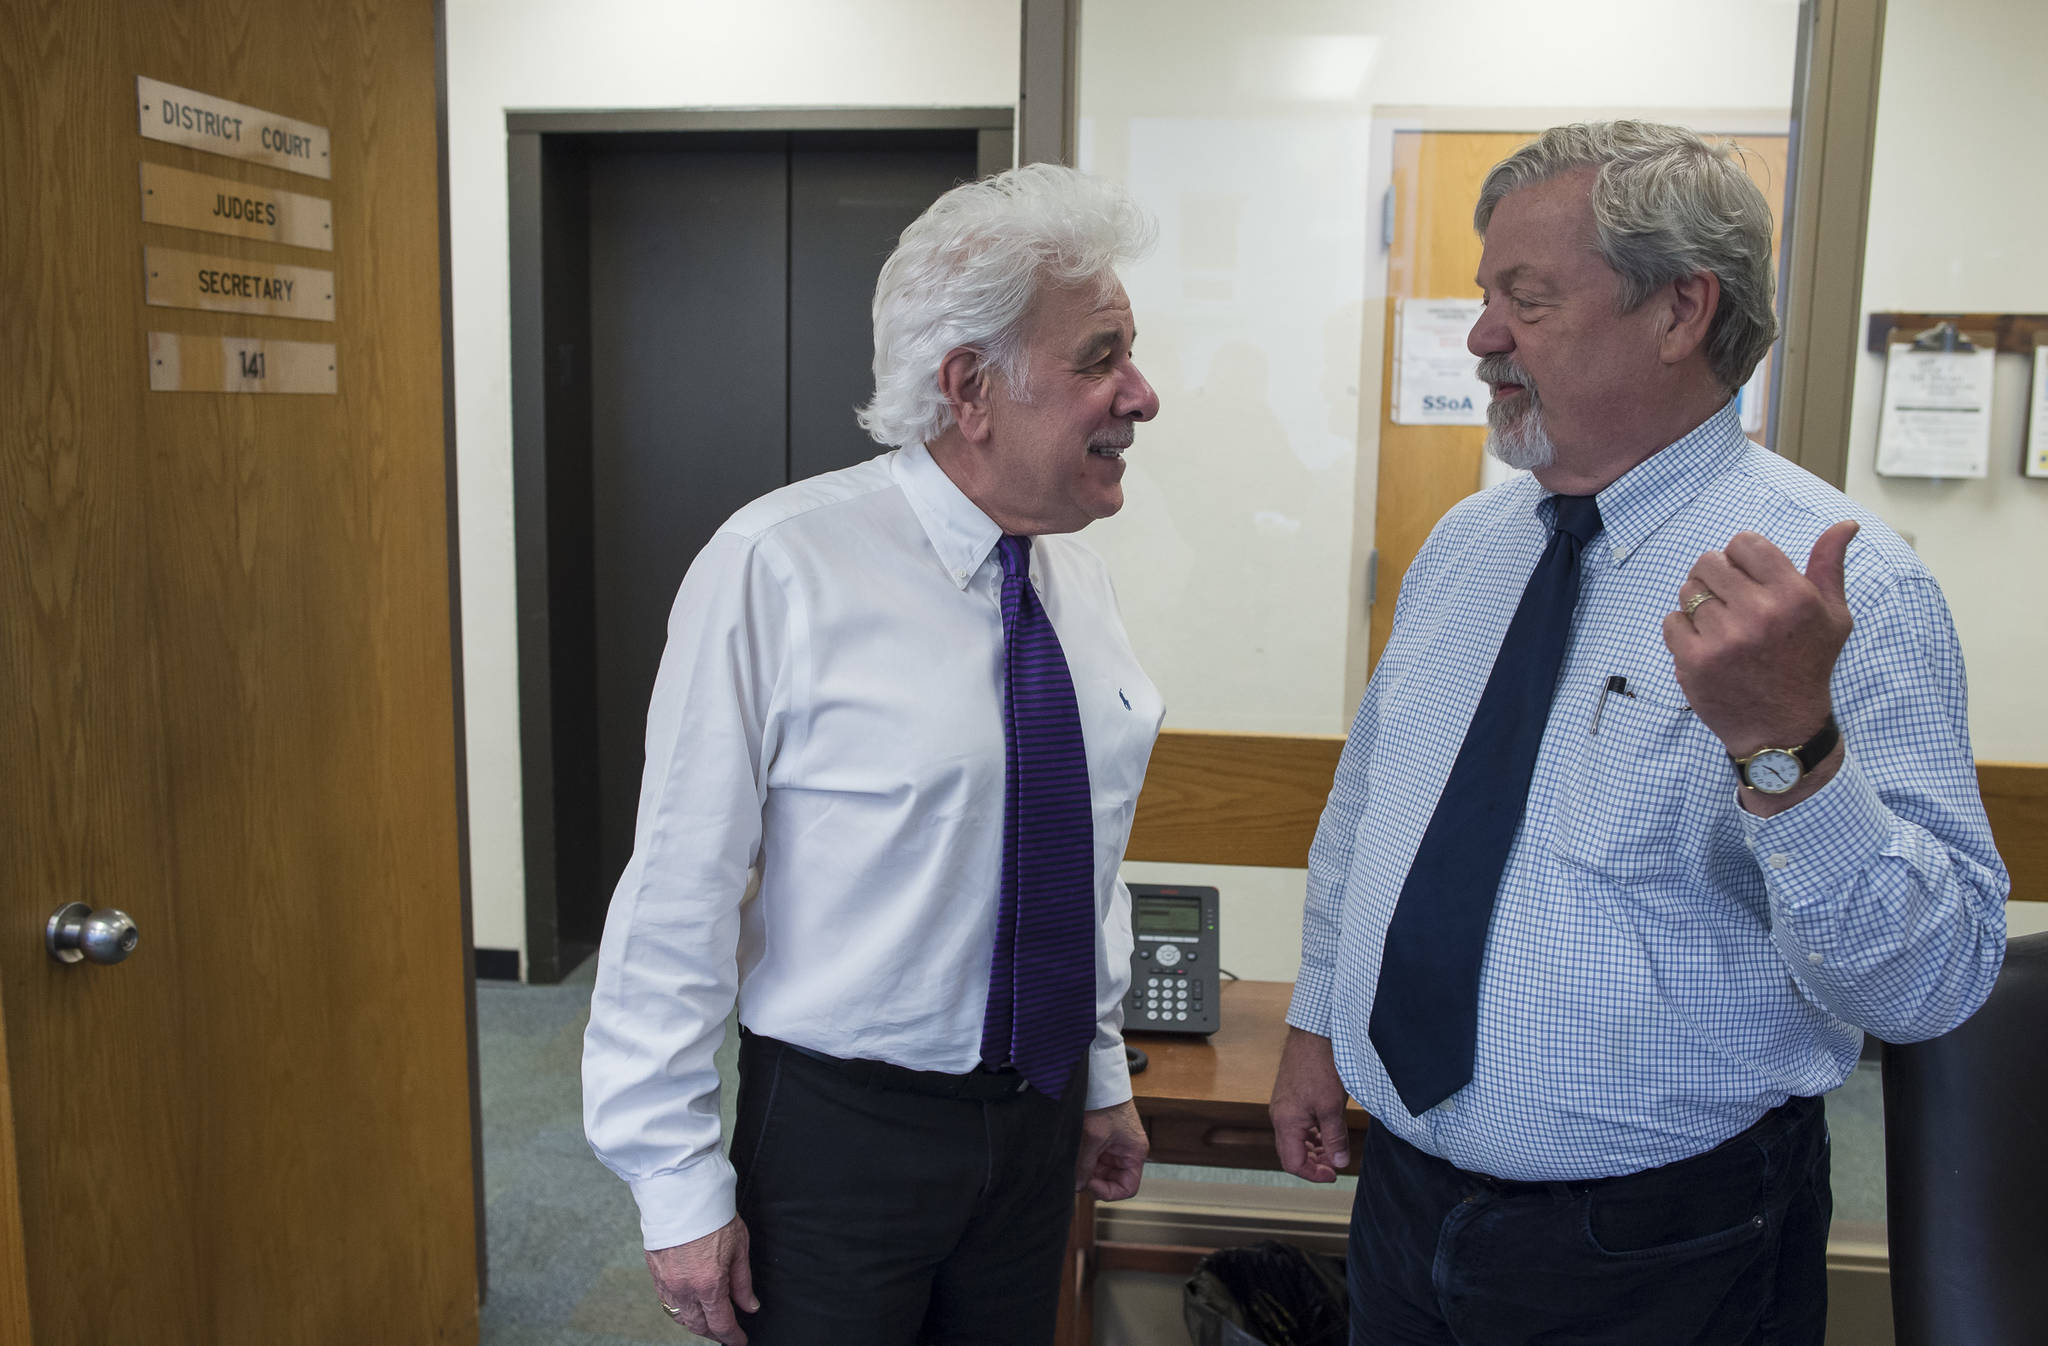 Juneau Superior Court Judge Louis Menendez, left, and Juneau District Court Judge Thomas Nave talk with each other outside their individual offices at the Dimond Courthouse on Friday, June 29, 2018. Both judges are retiring and Friday was their last day at work. Speaking about Judge Nave Judge Menendez said, “He is my best friend. I would do anything for him.”